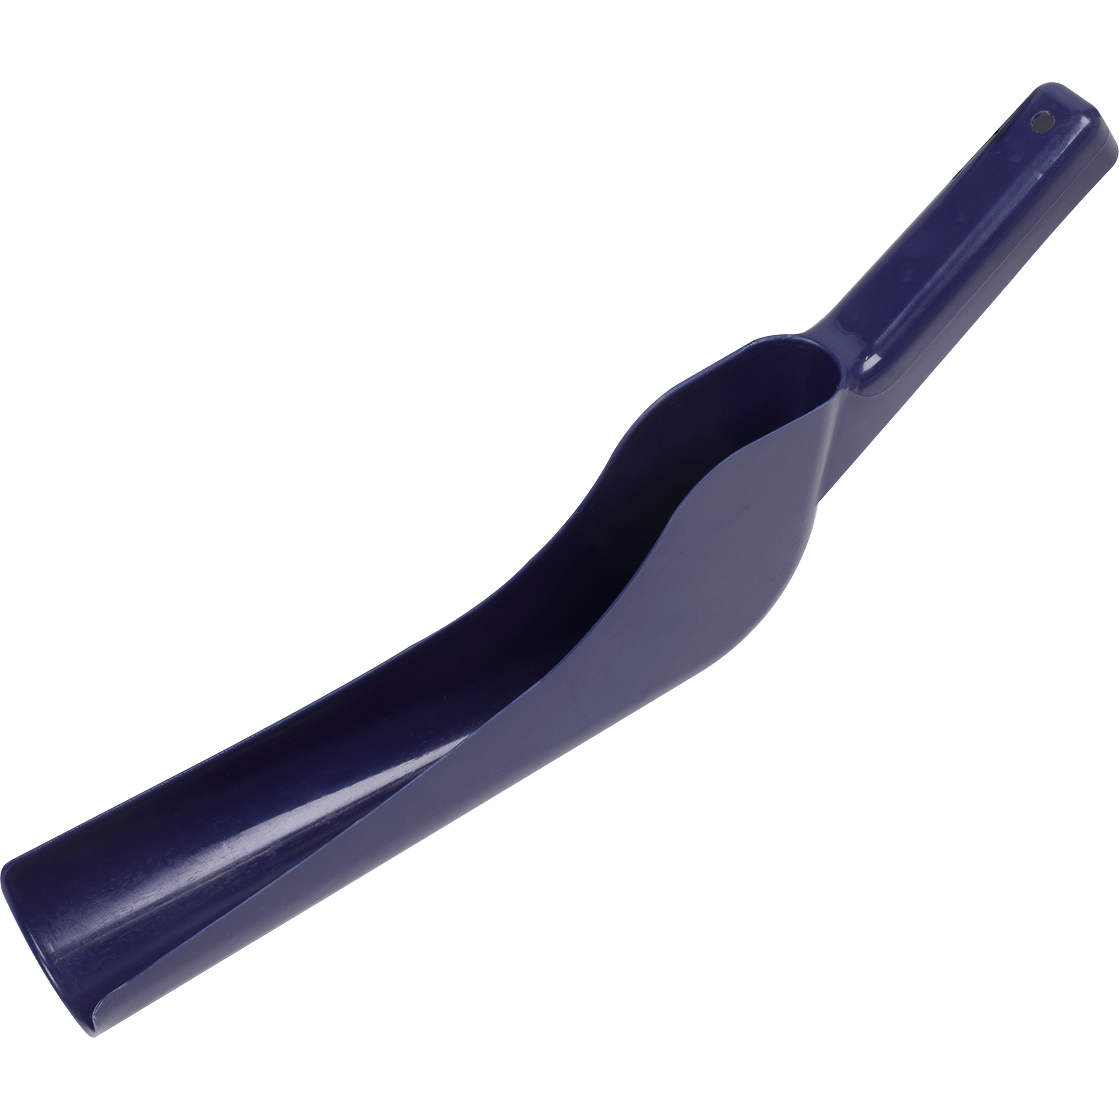 Photos - Other household chemicals Sealey GS01 Gutter Cleaning Scoop 